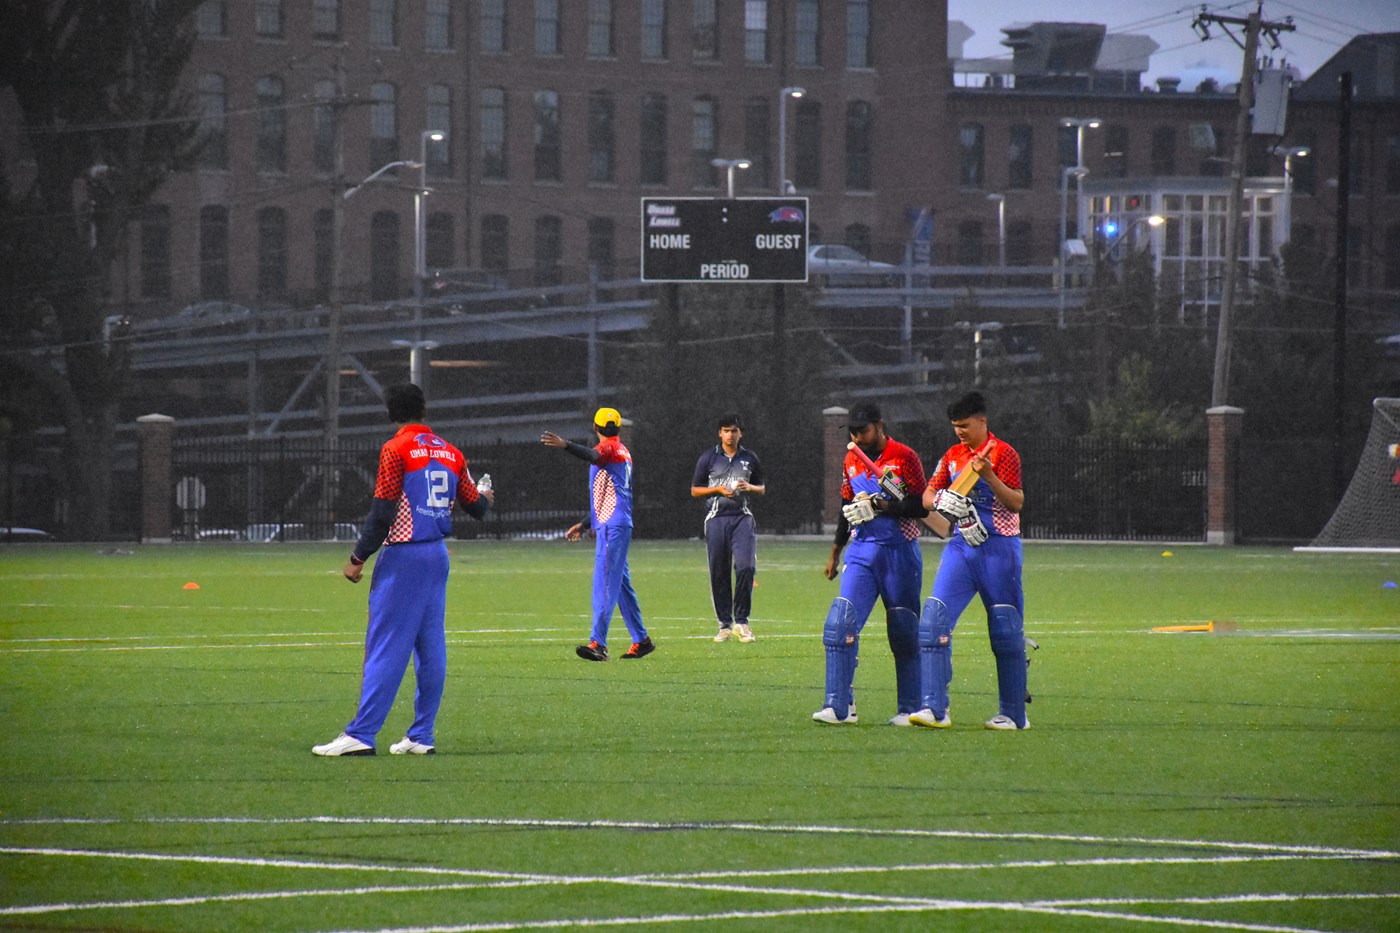 Cricket team taking the field during a match